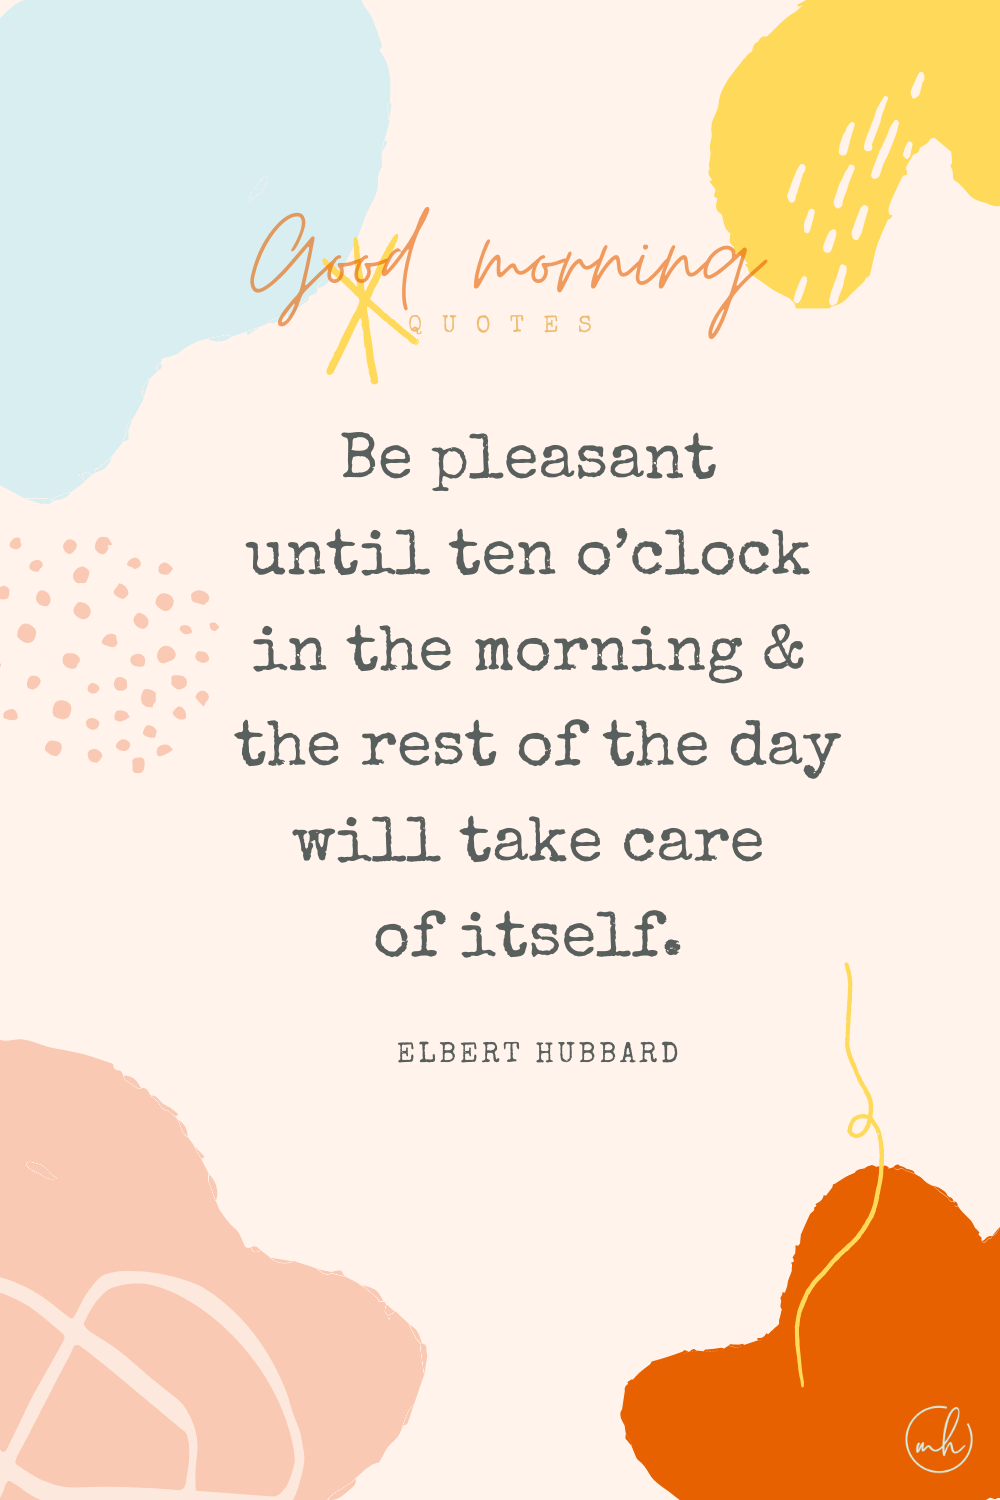 "Be pleasant until ten o’clock in the morning and the rest of the day will take care of itself." — Elbert Hubbard